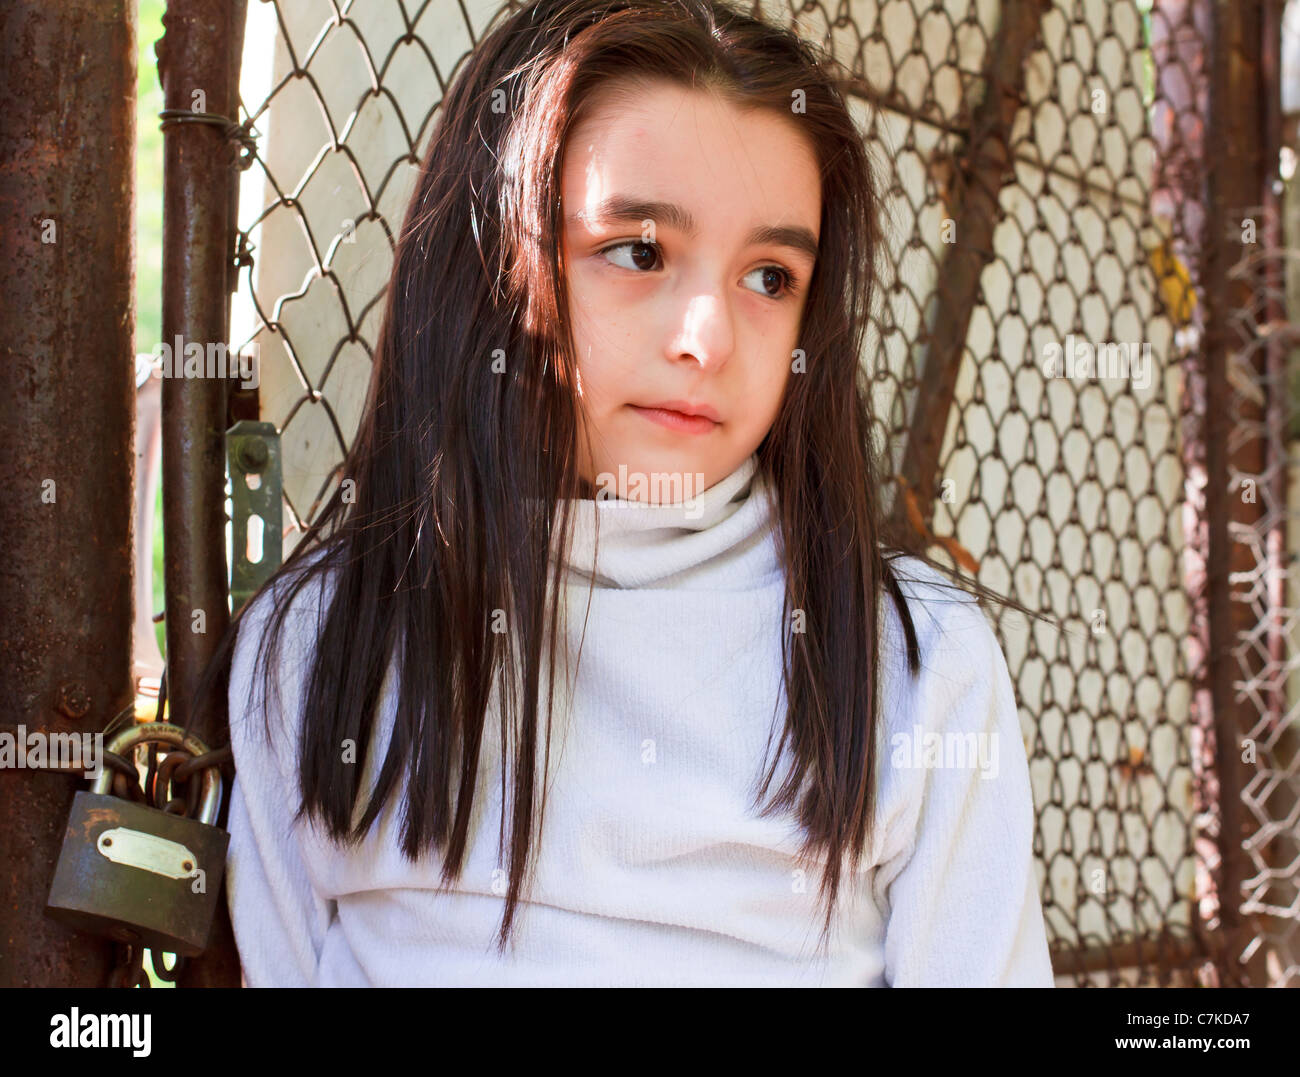 Sad and scared little girl in front of a wire fence Stock Photo